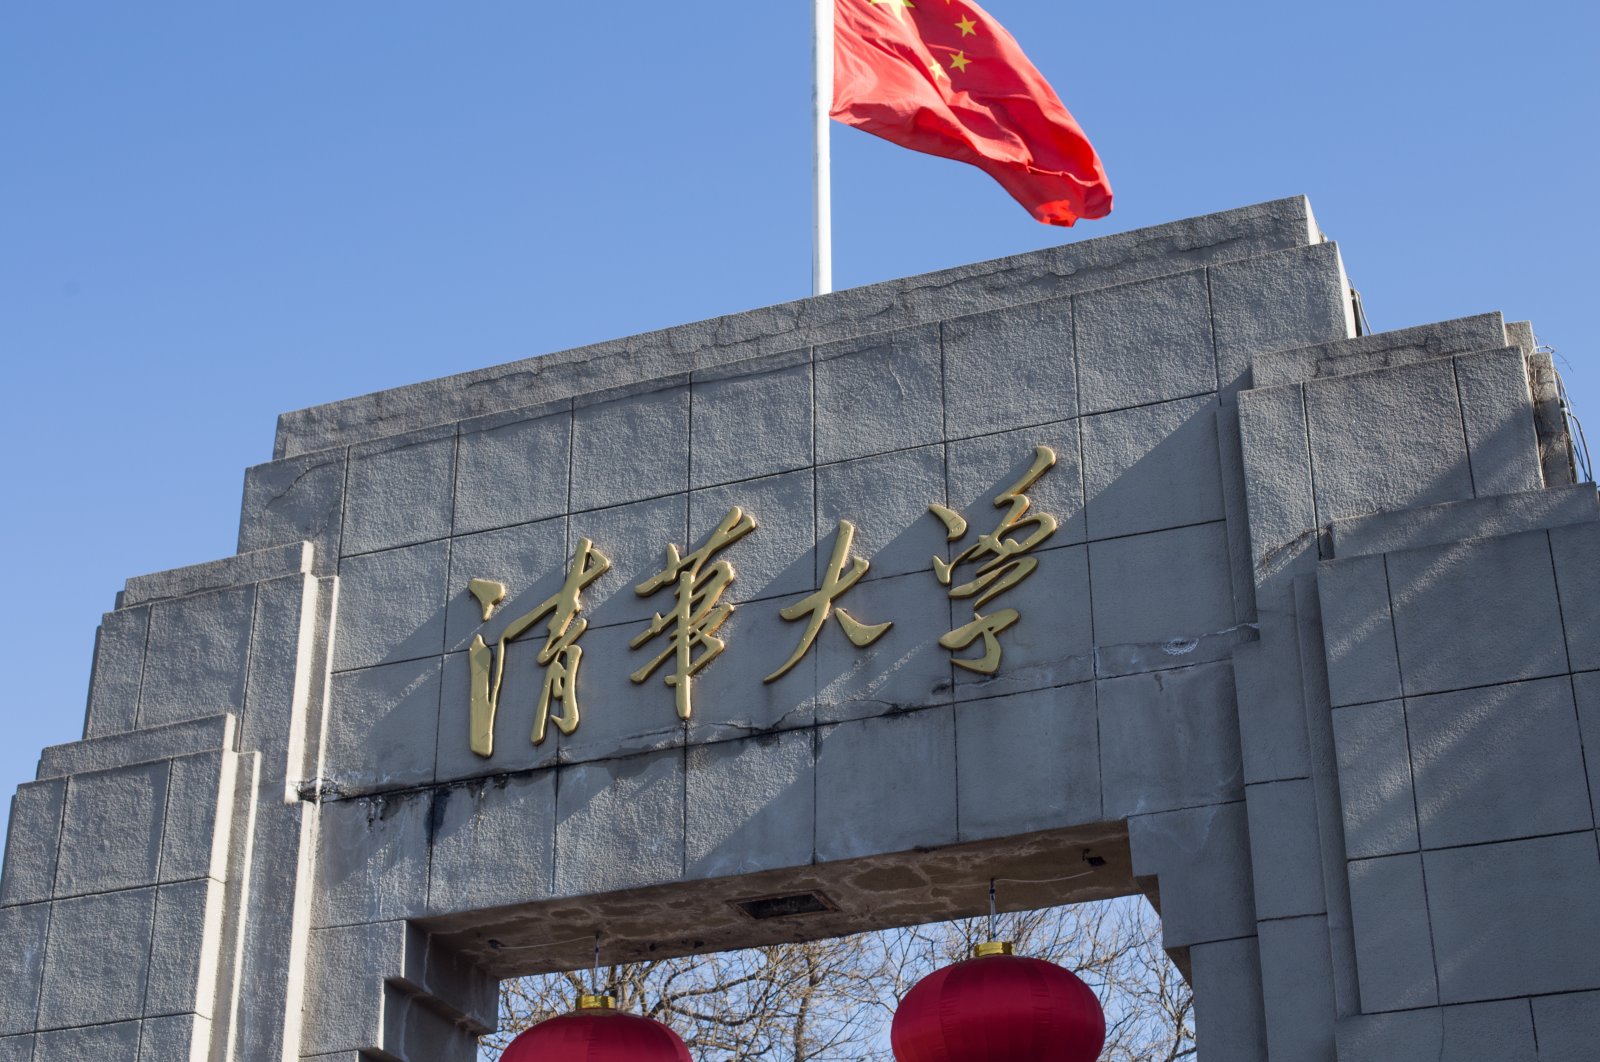 The sign and main gate of the Tsinghua University in Beijing, China, January 2017. (Shutterstock Photo)